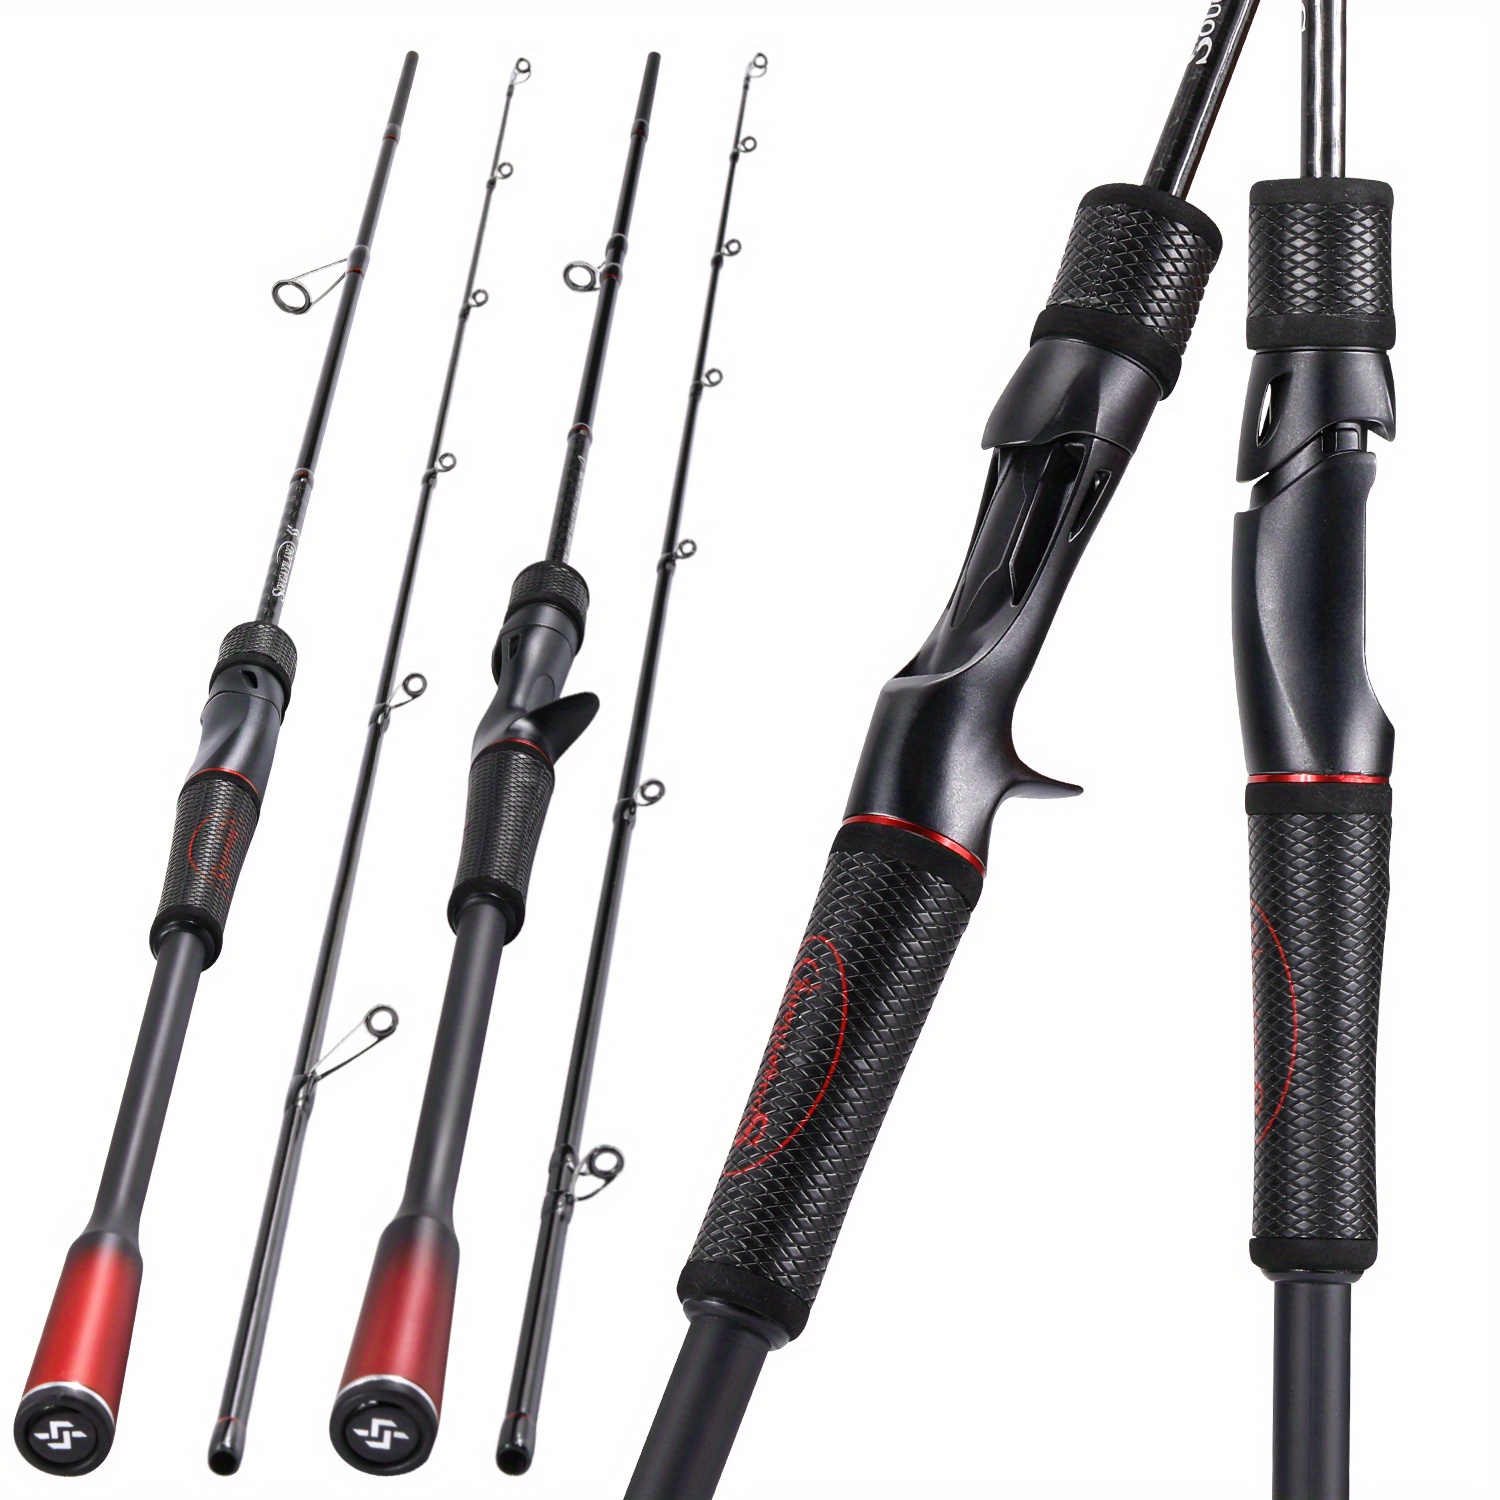 One Bass Fishing Pole - Lightweight 24 Ton Carbon Fiber Rod for Bass  Fishing - Two Pieces, SuperPolymer Handle